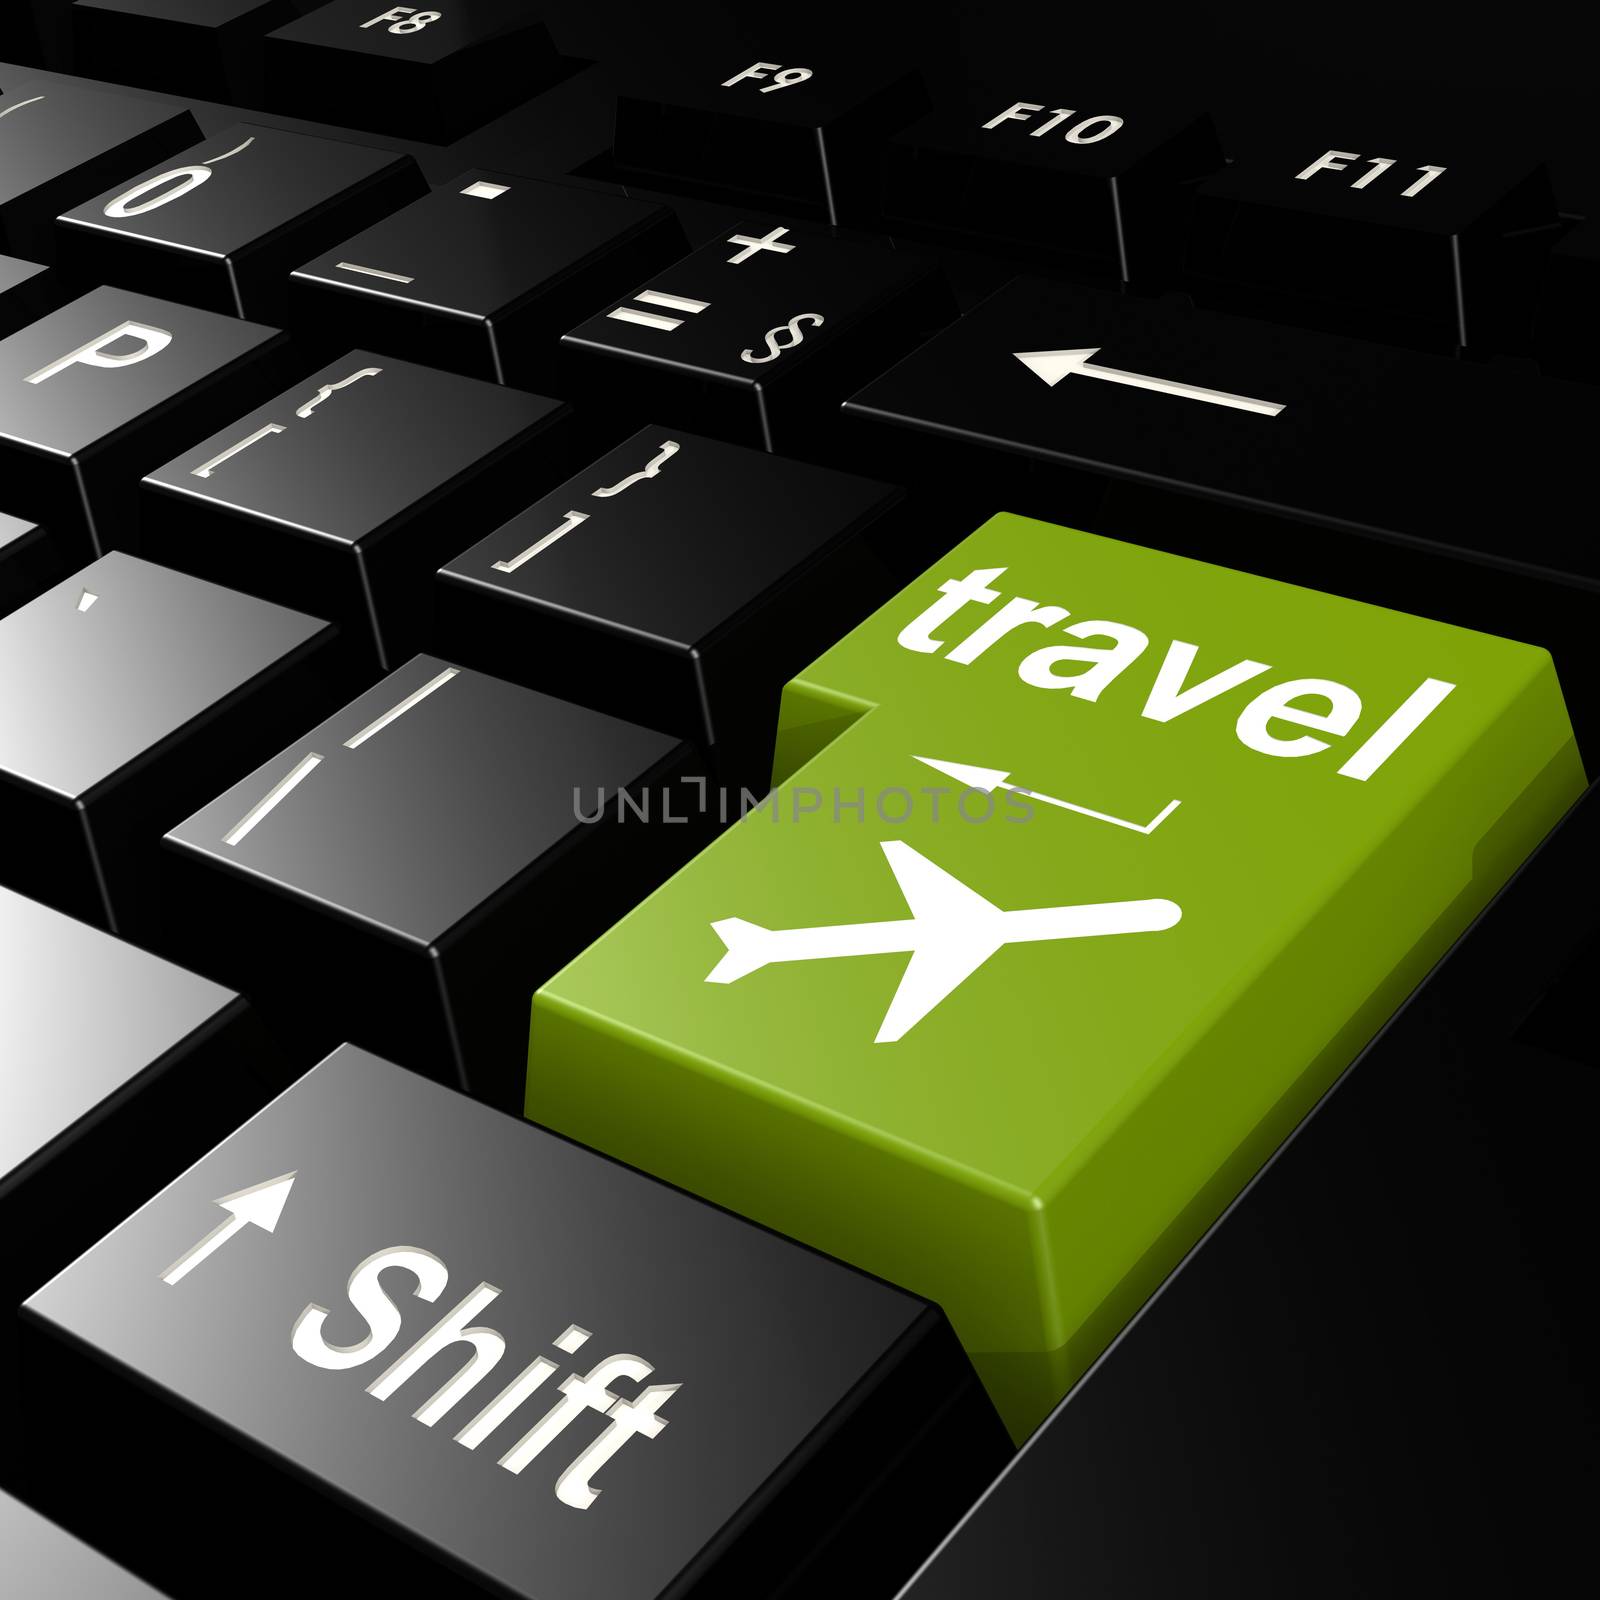 Travel with flight on green keyboard by tang90246